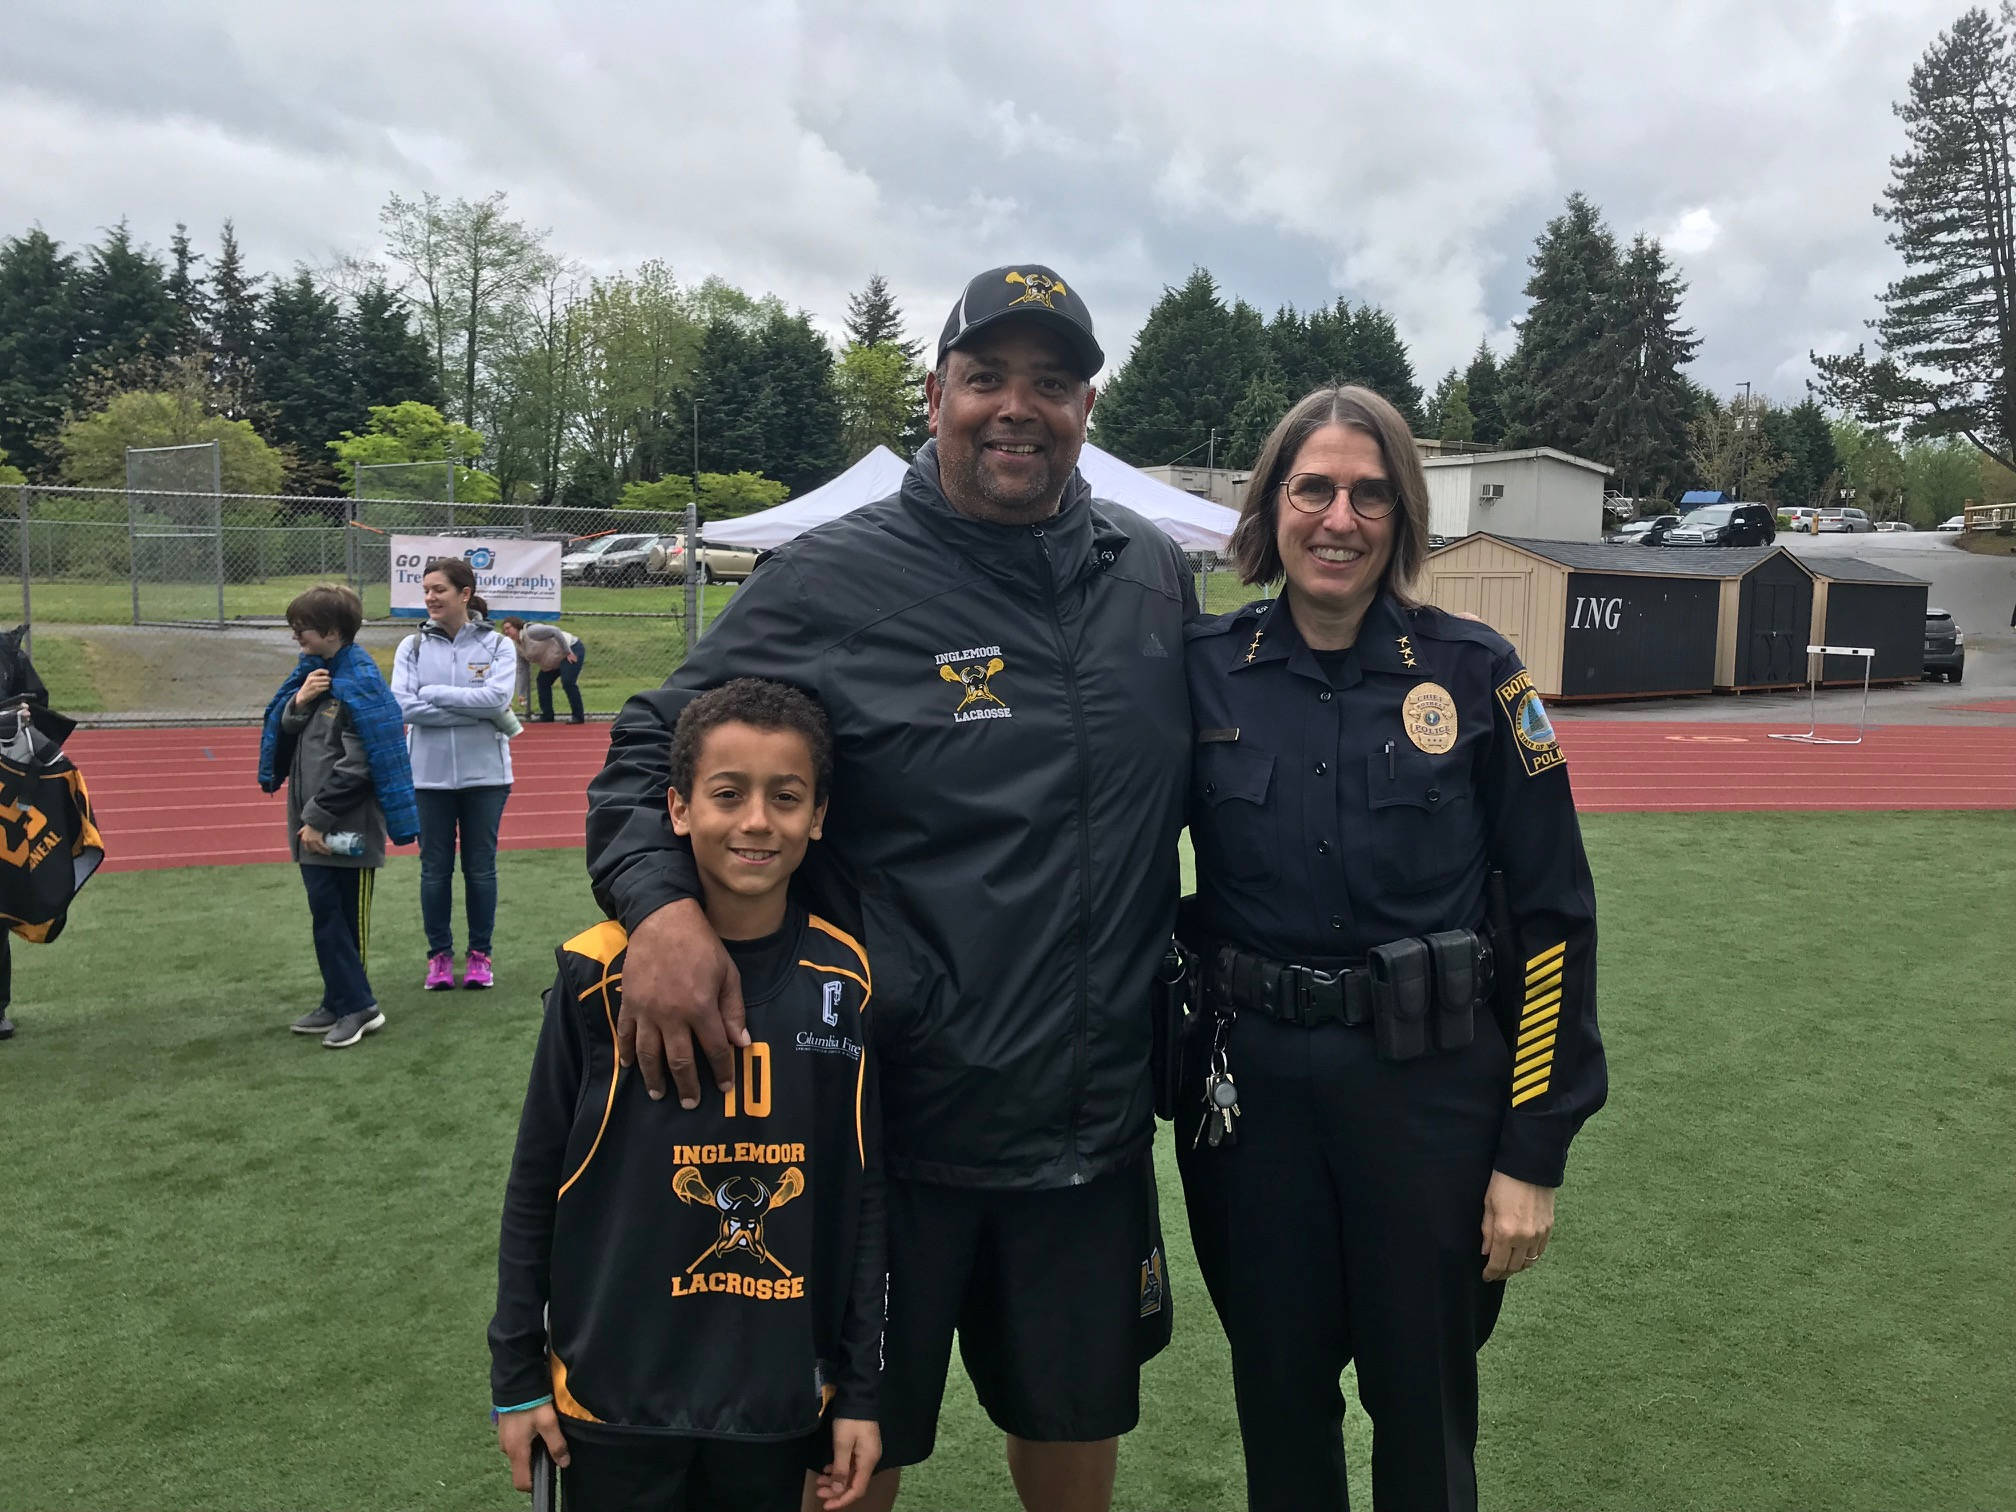 From left, Jarron Austin of the Inglemoor 3/4 team poses with James McNeal and Bothell Police Chief Carol Cummings. Courtesy photo